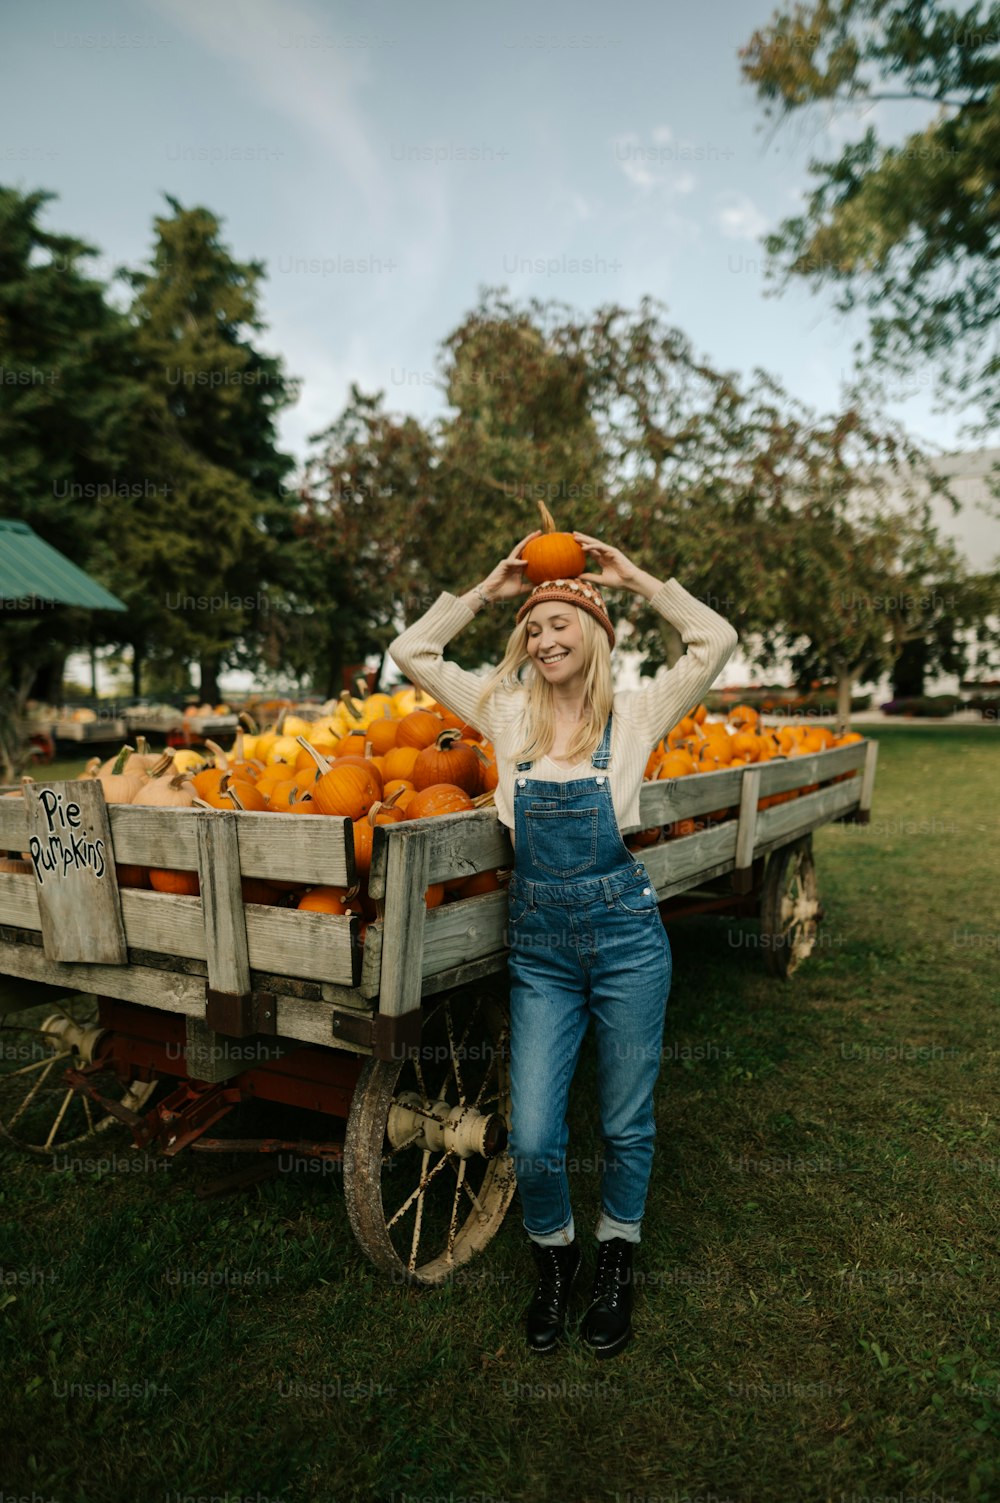 a woman standing next to a wagon filled with oranges